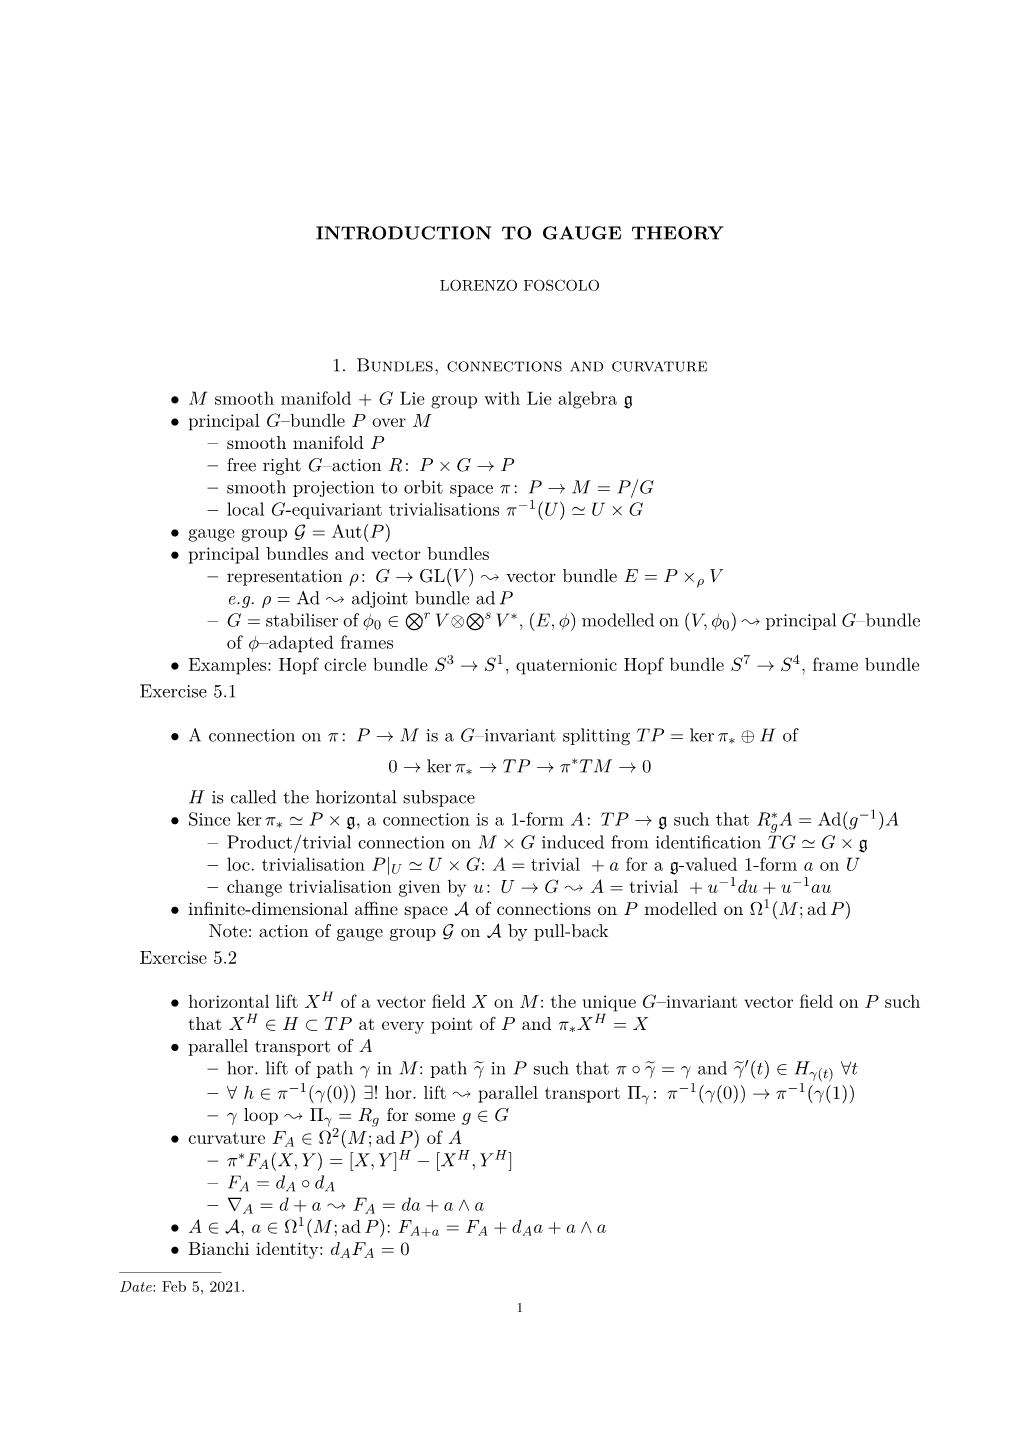 INTRODUCTION to GAUGE THEORY 1. Bundles, Connections